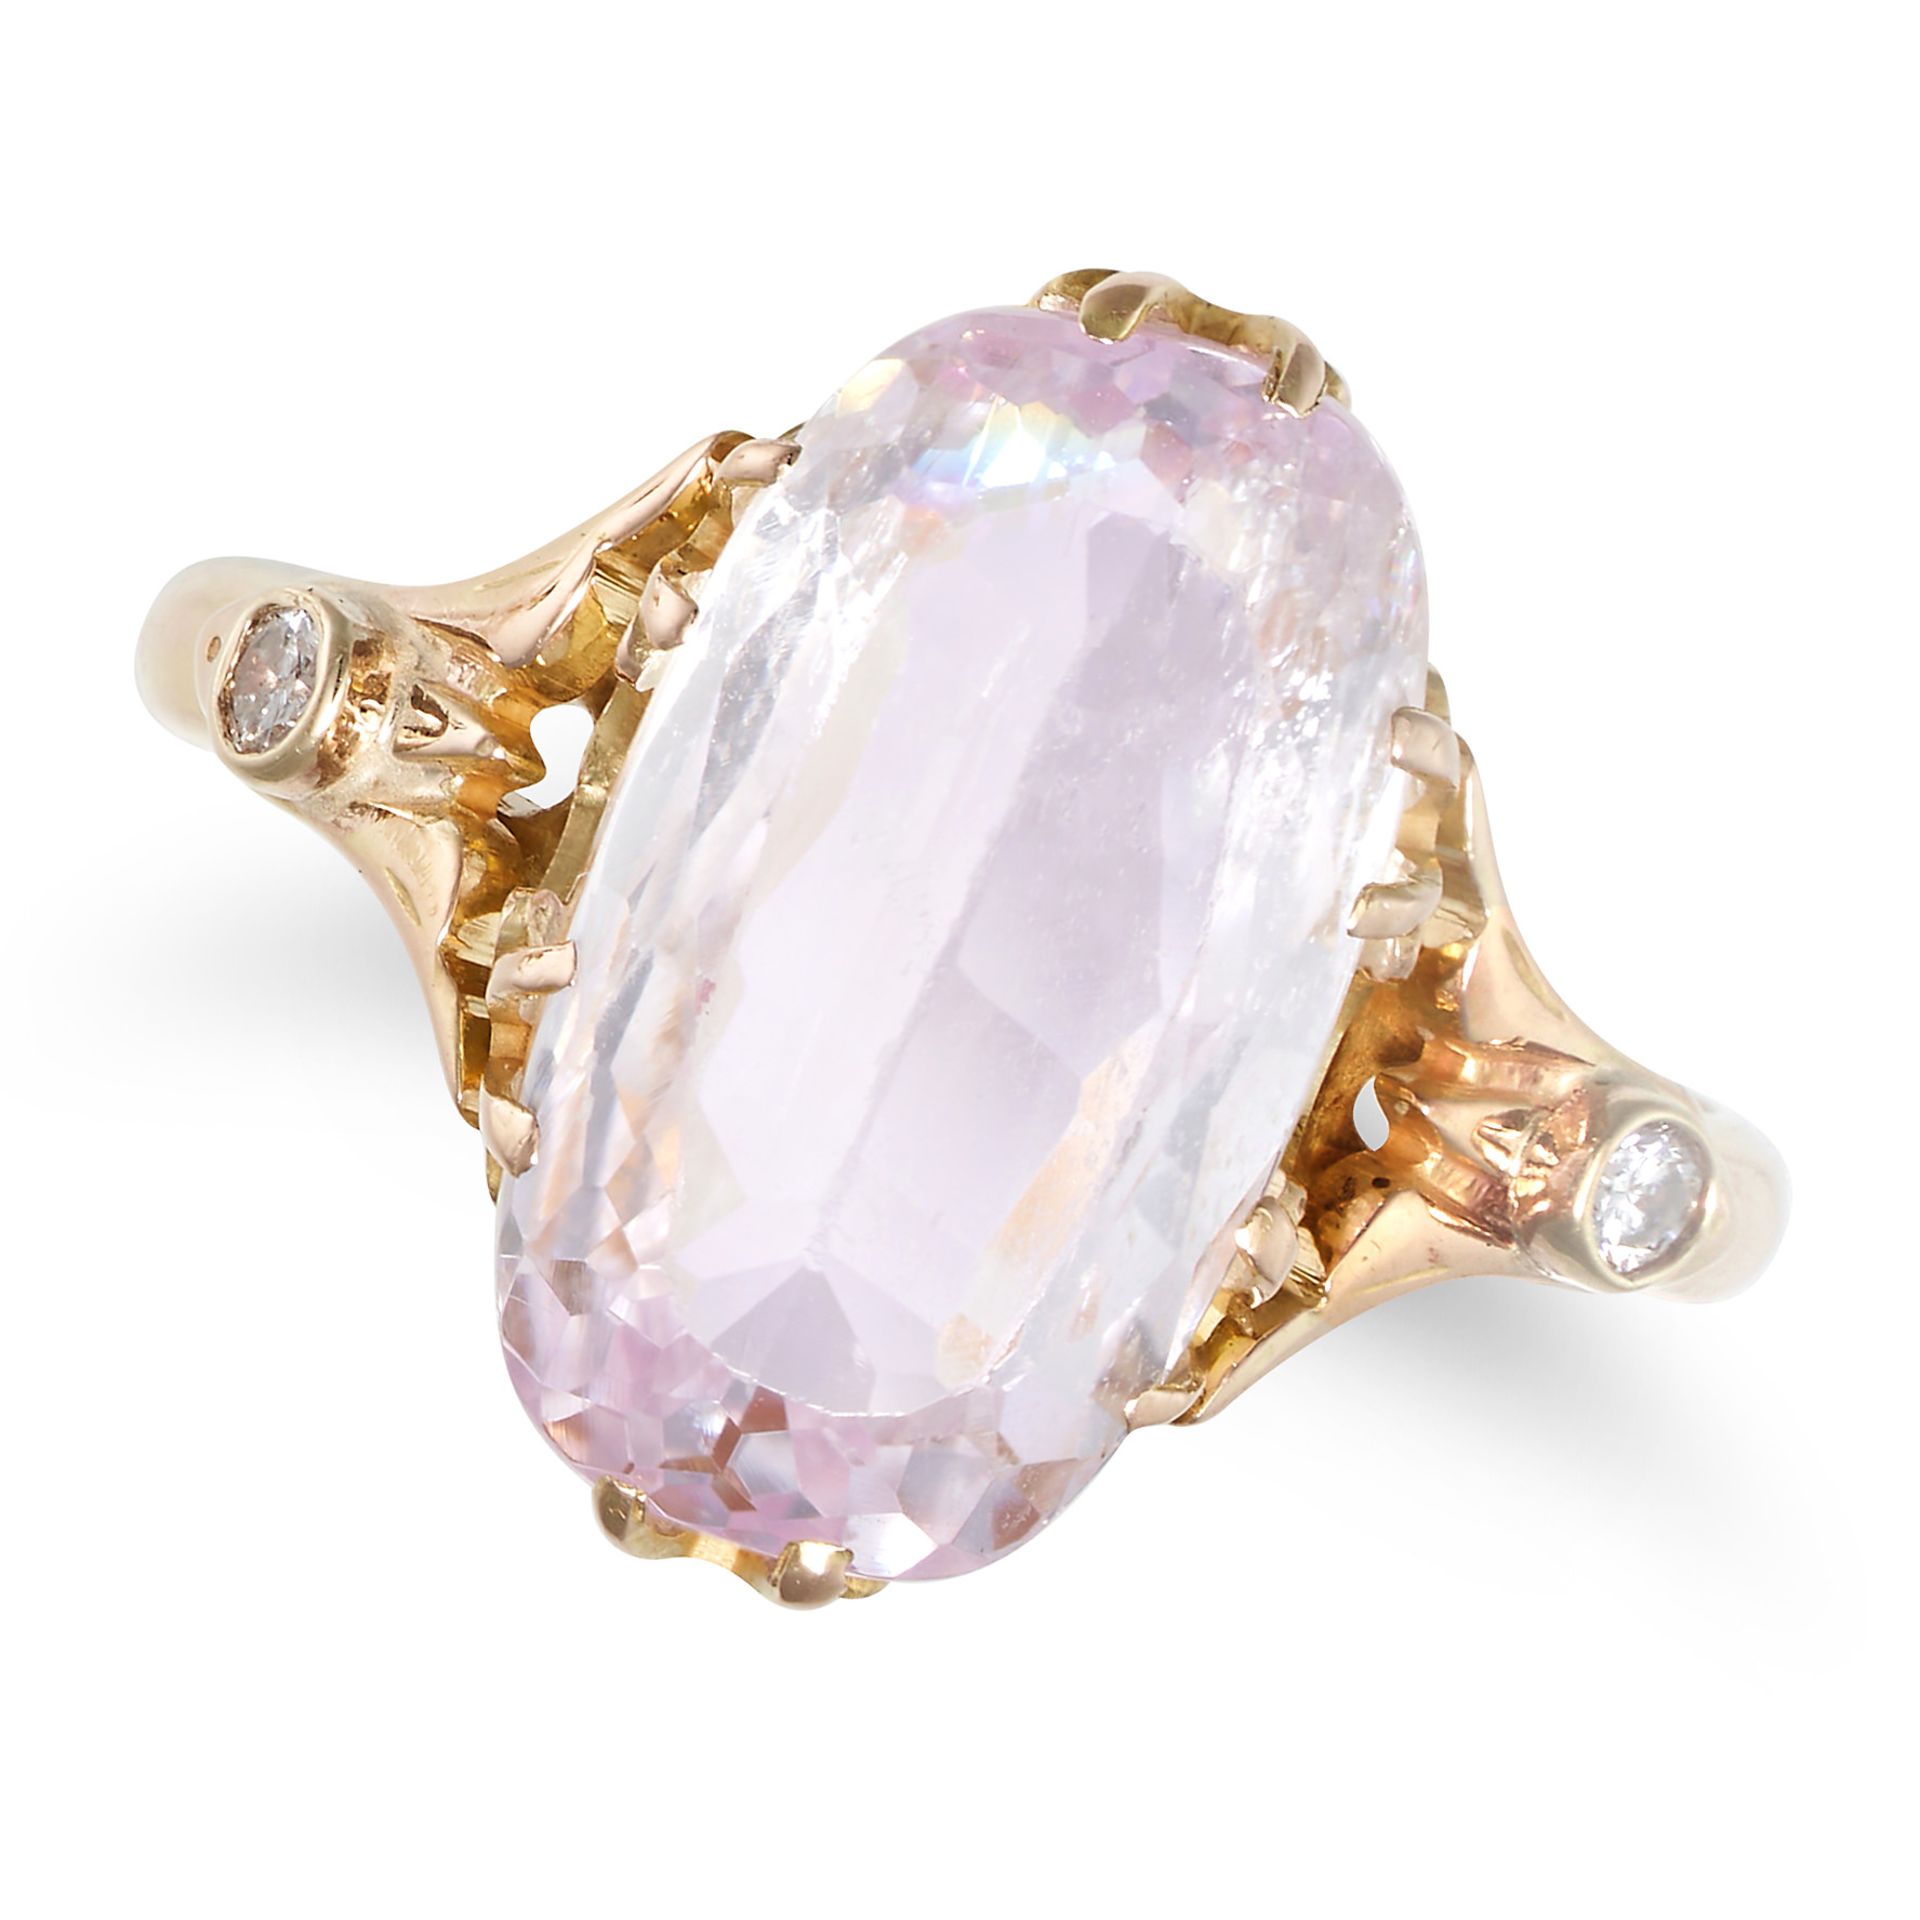 A PINK TOPAZ AND DIAMOND RING in 9ct yellow gold, set with an oval cut pink topaz of approximatel...